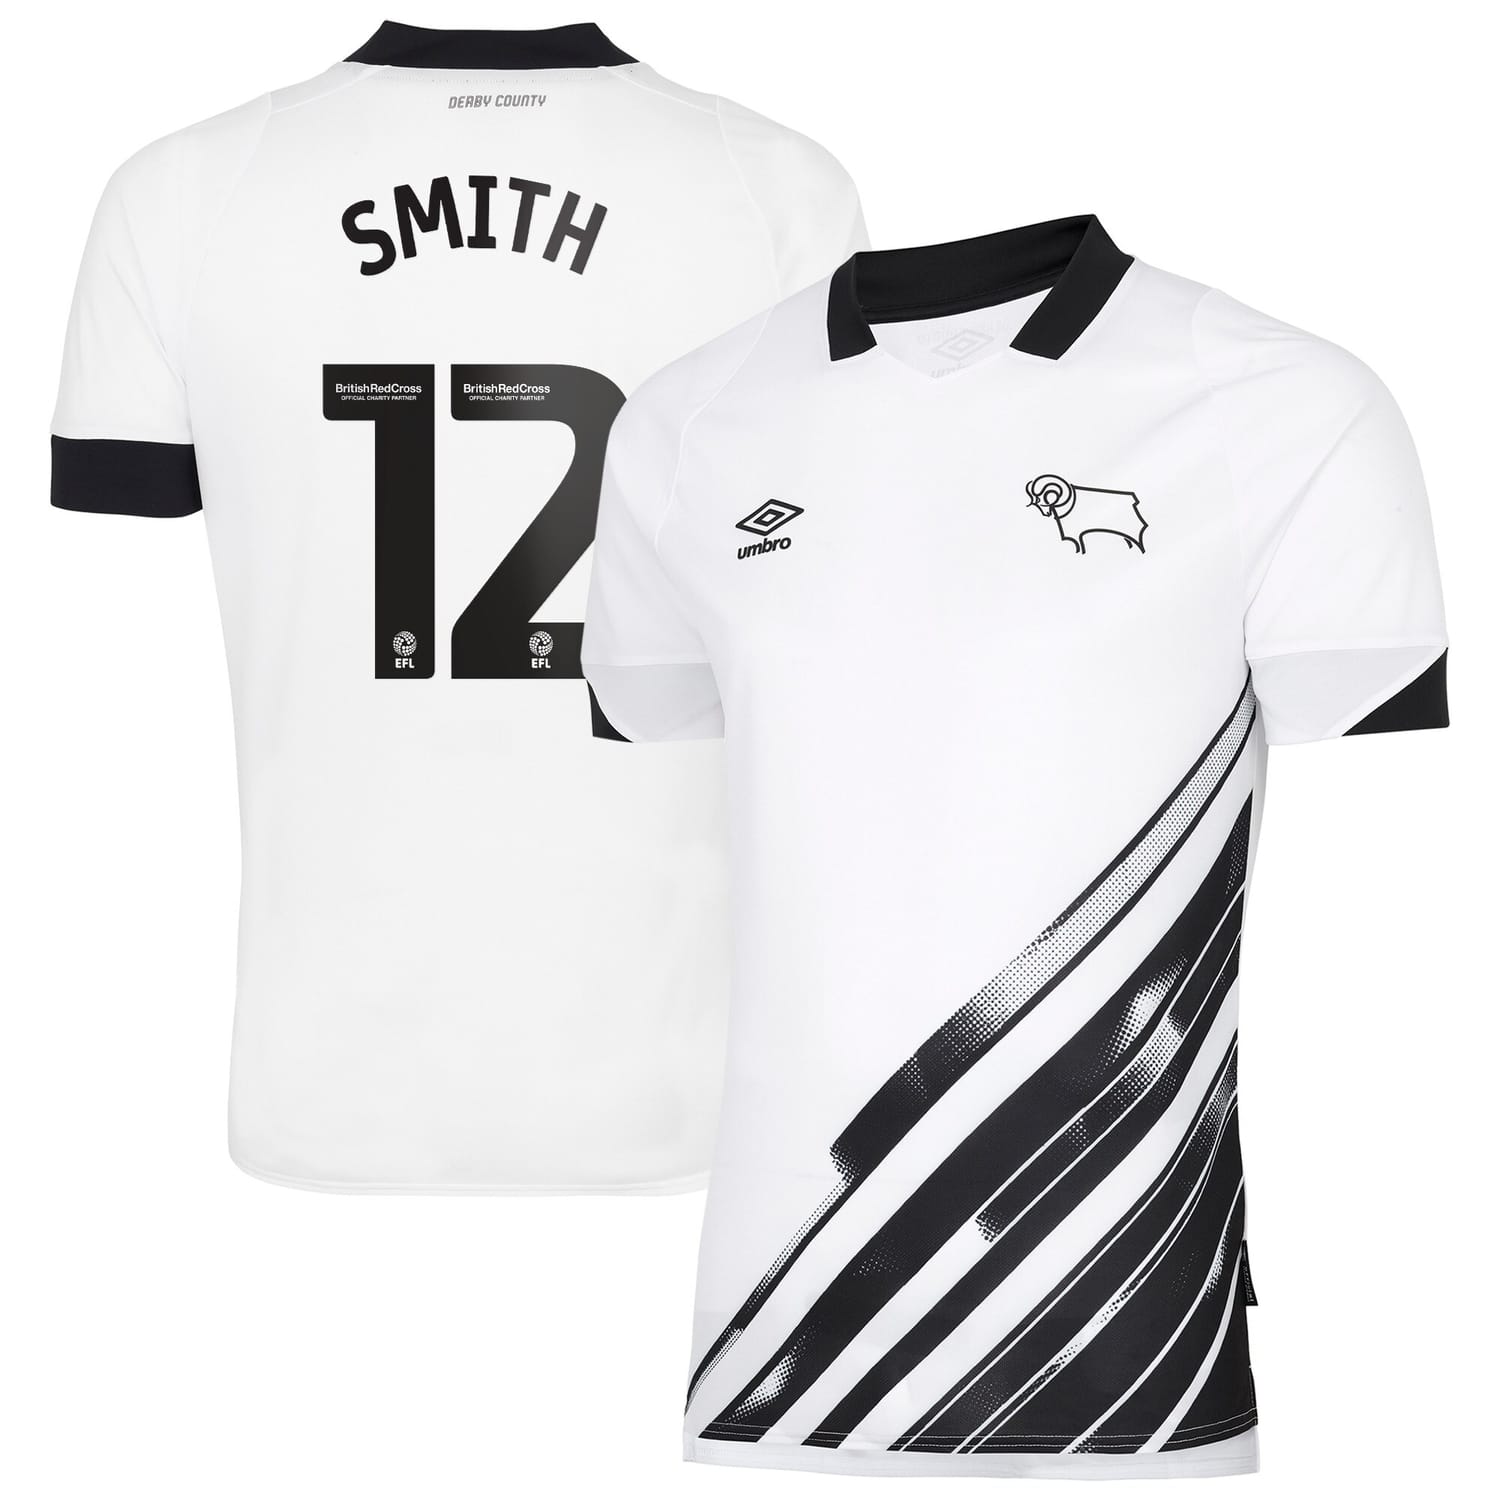 EFL League One Derby County Home Jersey Shirt 2022-23 player Smith 12 printing for Men